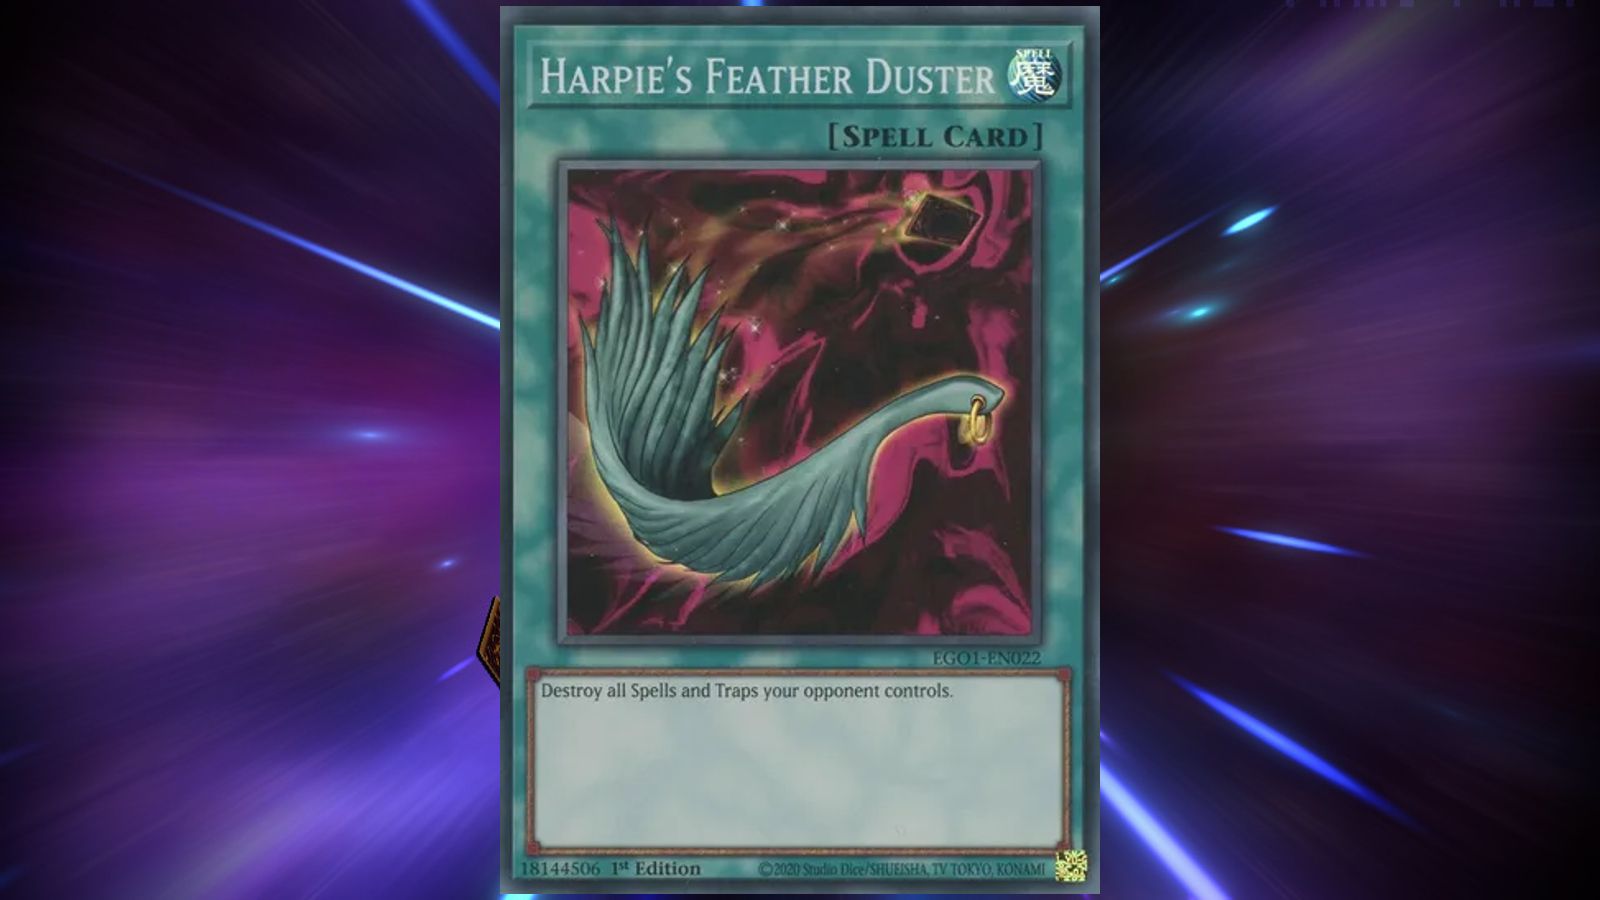 Yu-Gi-Oh! Master Duel players should craft Harpie's Feather Duster.